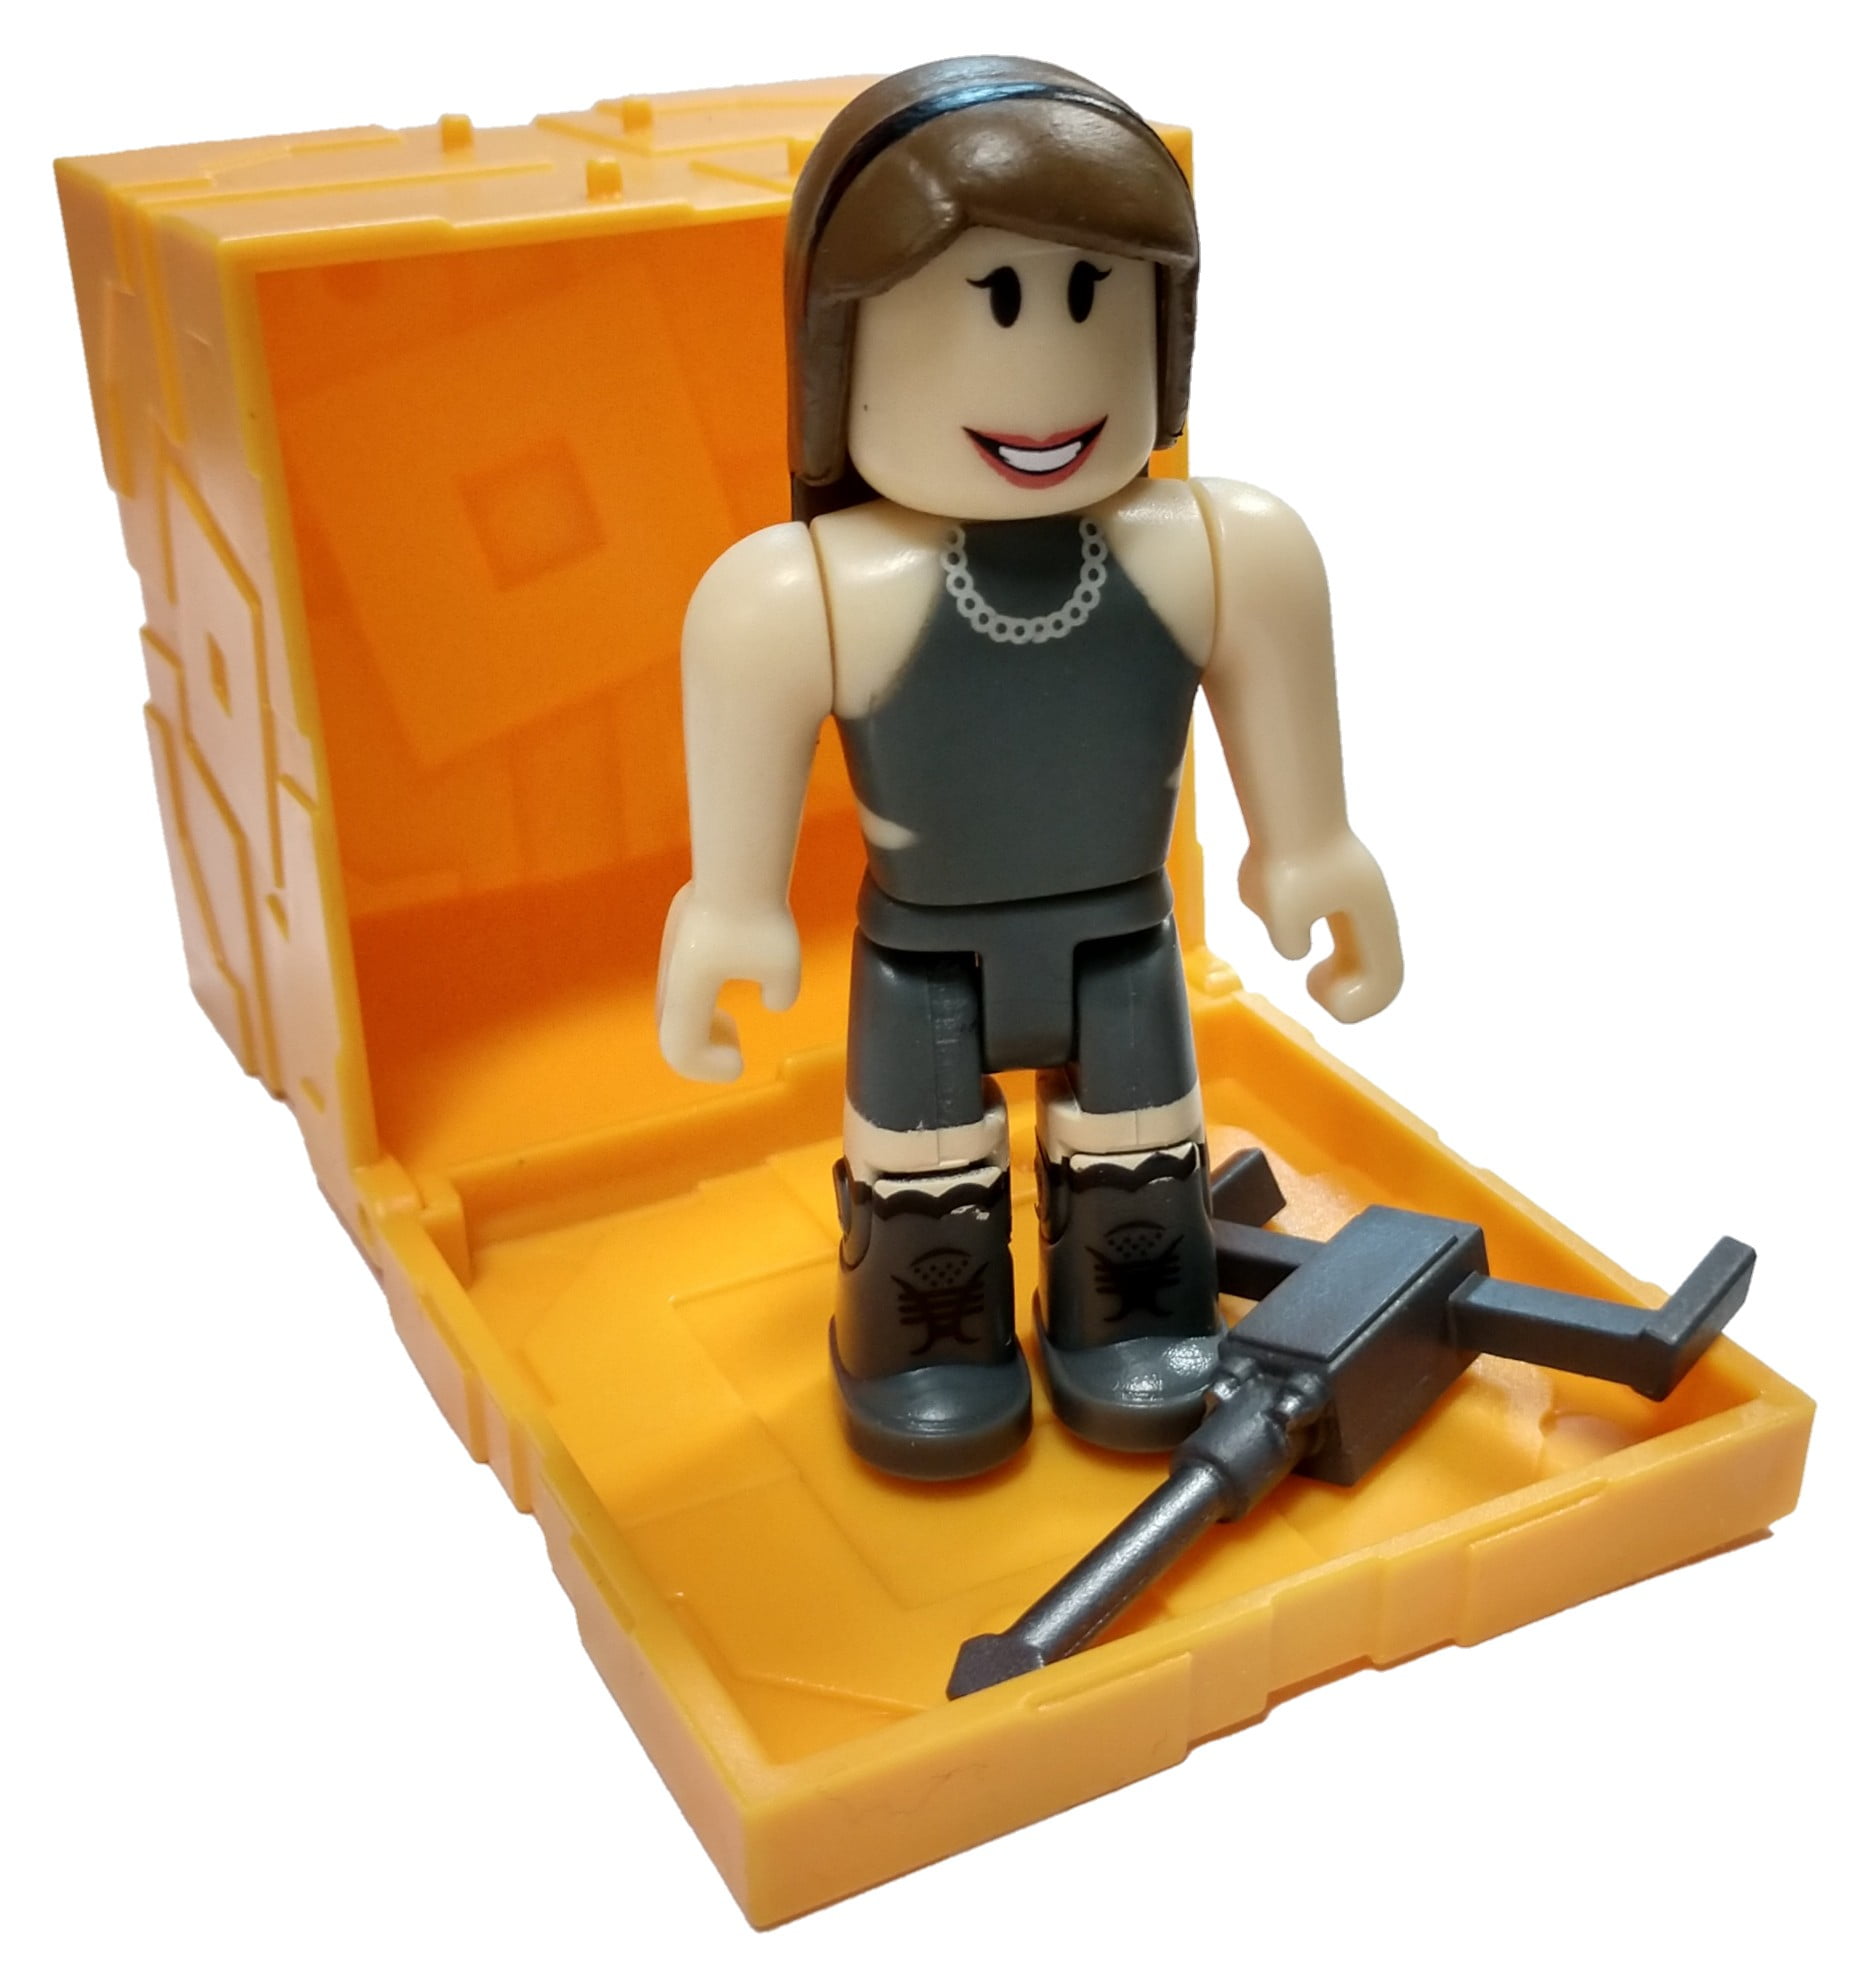 Roblox Series 5 Store Wars Bargain Hunter Mini Figure With Gold Cube And Online Code No Packaging Walmart Com Walmart Com - jazwares roblox series 5 store wars bargain hunter mini figure with gold cube and online code no packaging from walmart people